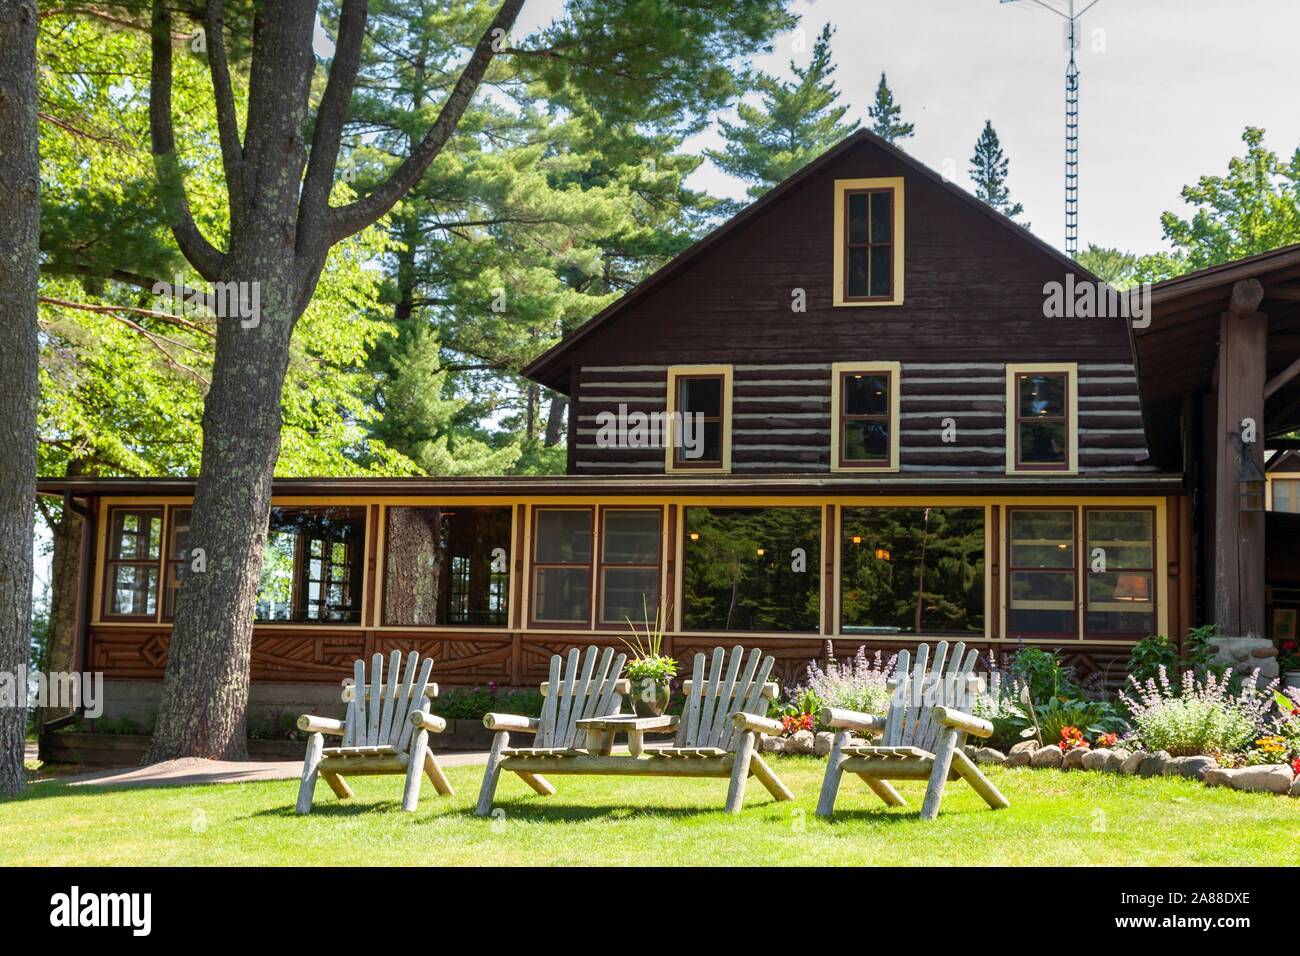 The Home Lake Lodge at Dairymen’s Country Club in the Northwoods village of Boulder Junction, Wisconsin. Stock Photo